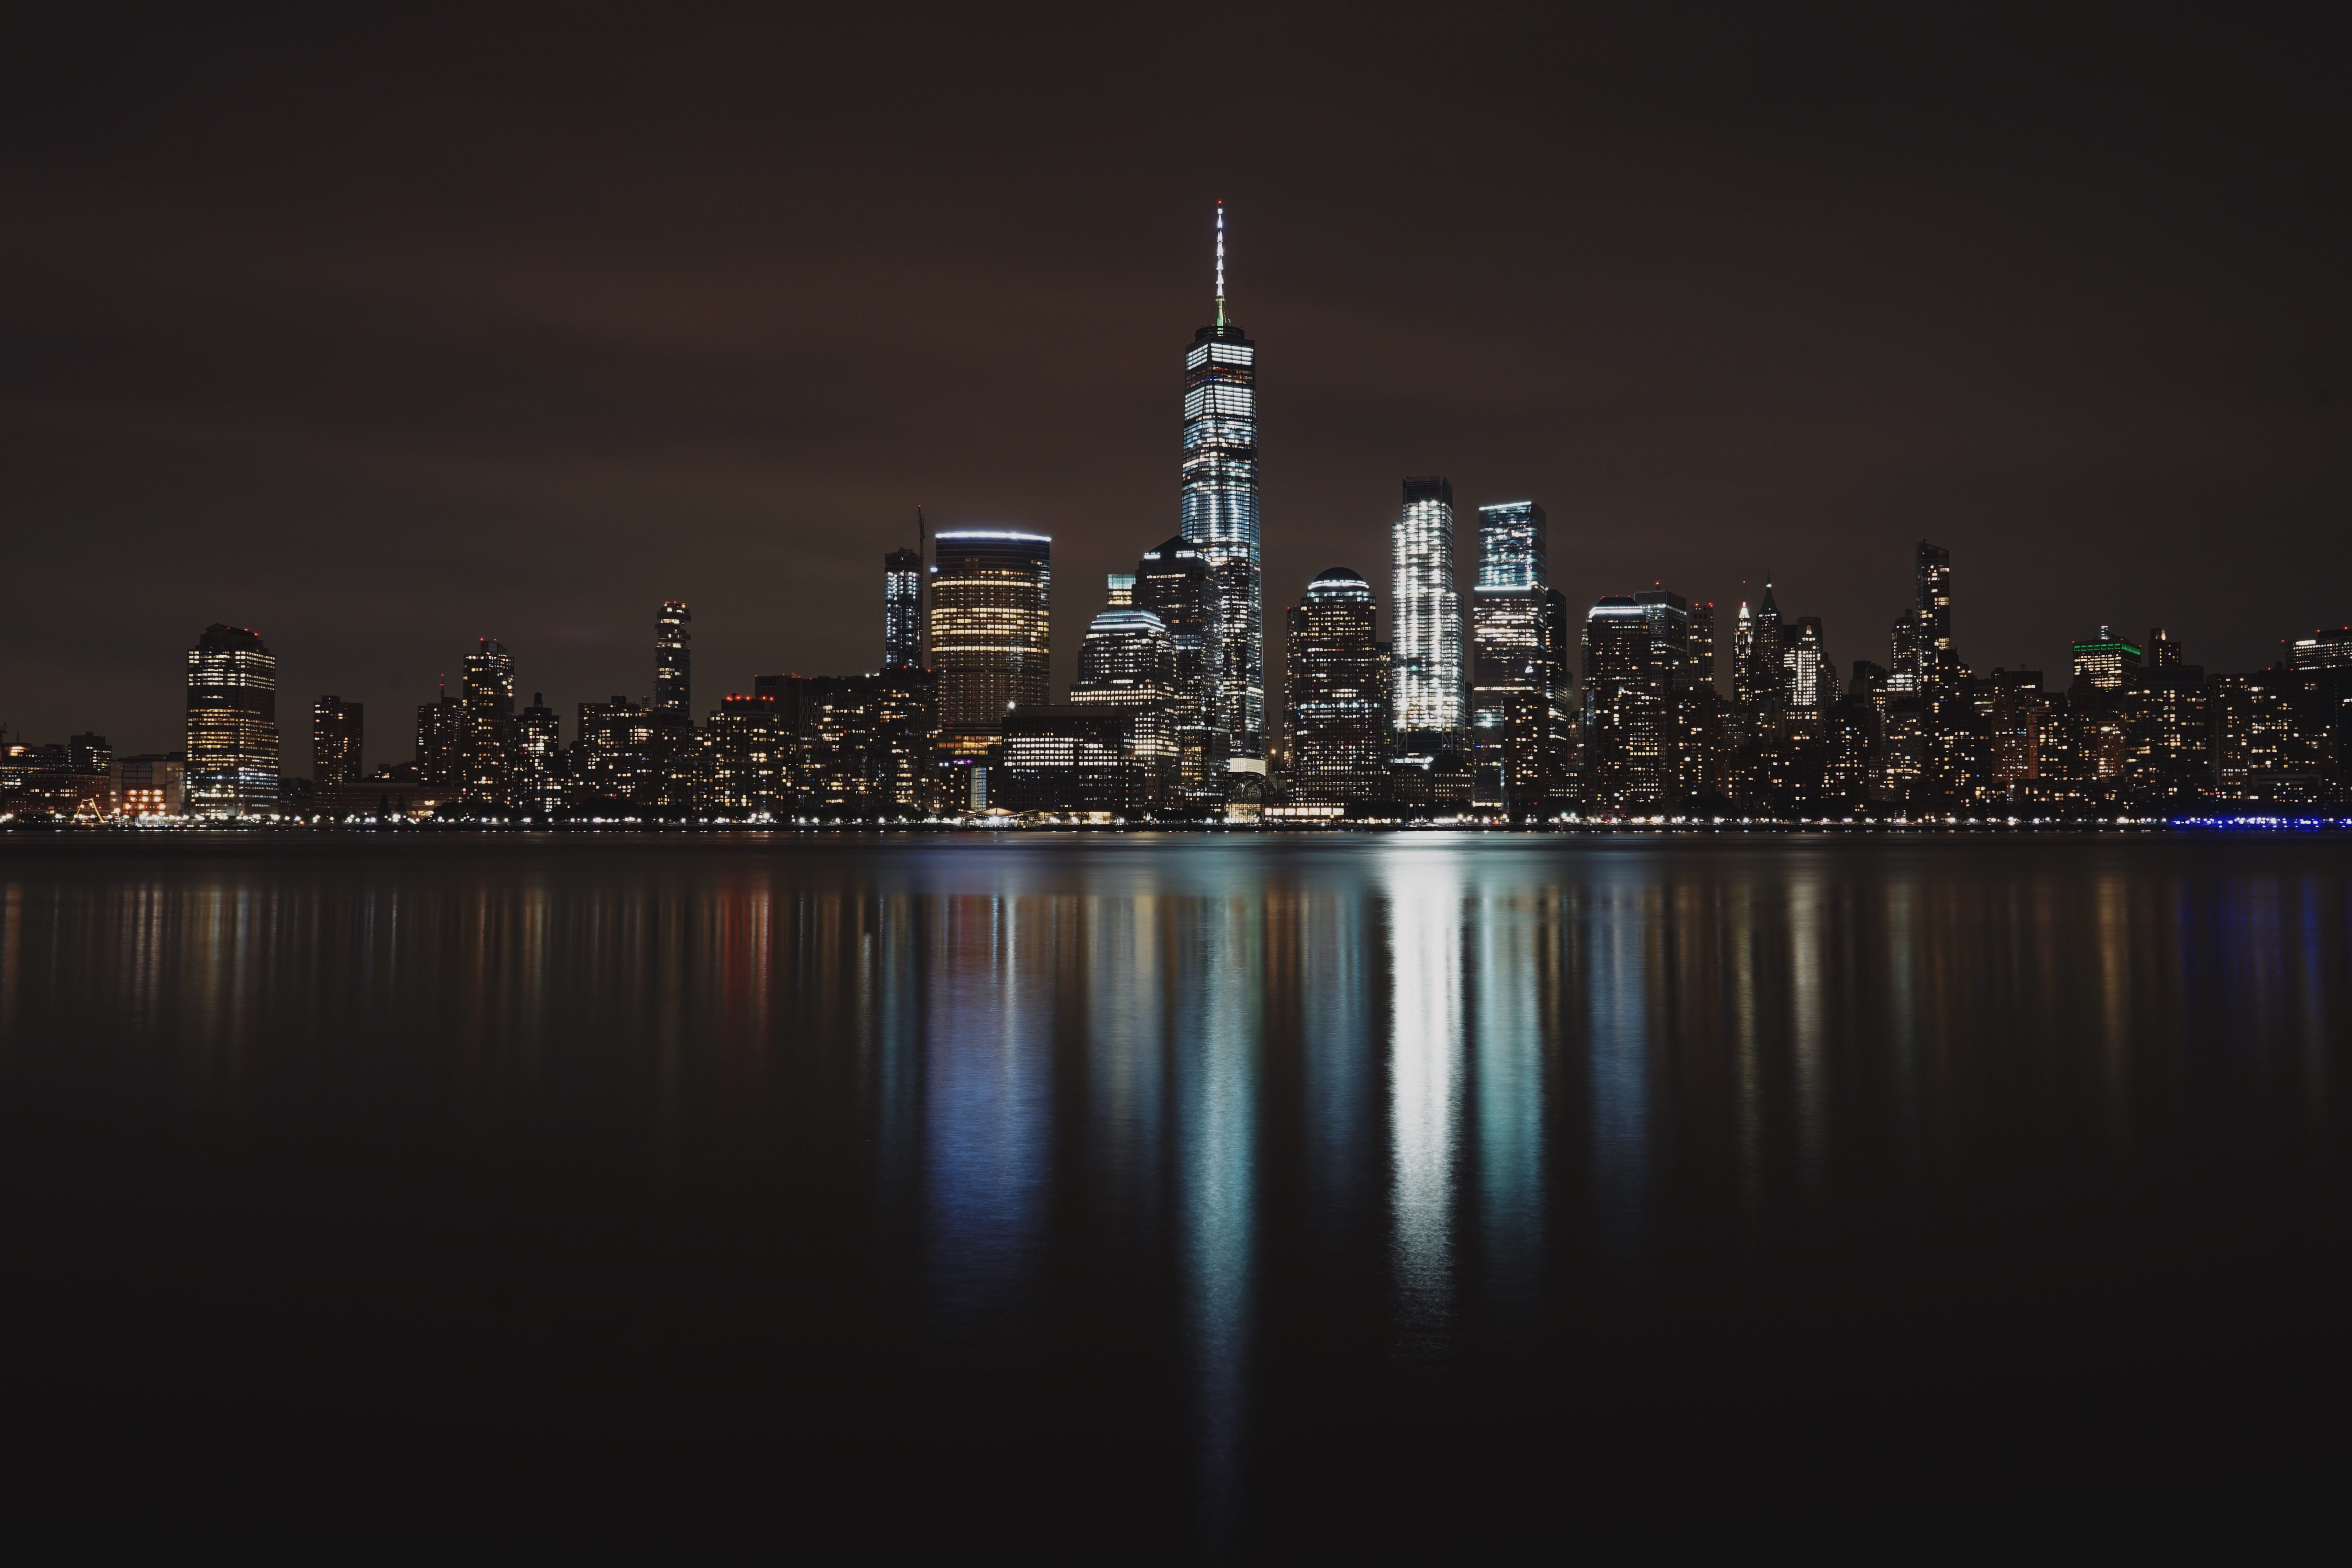 The New York City skyline and the lights from the building being reflected in water.